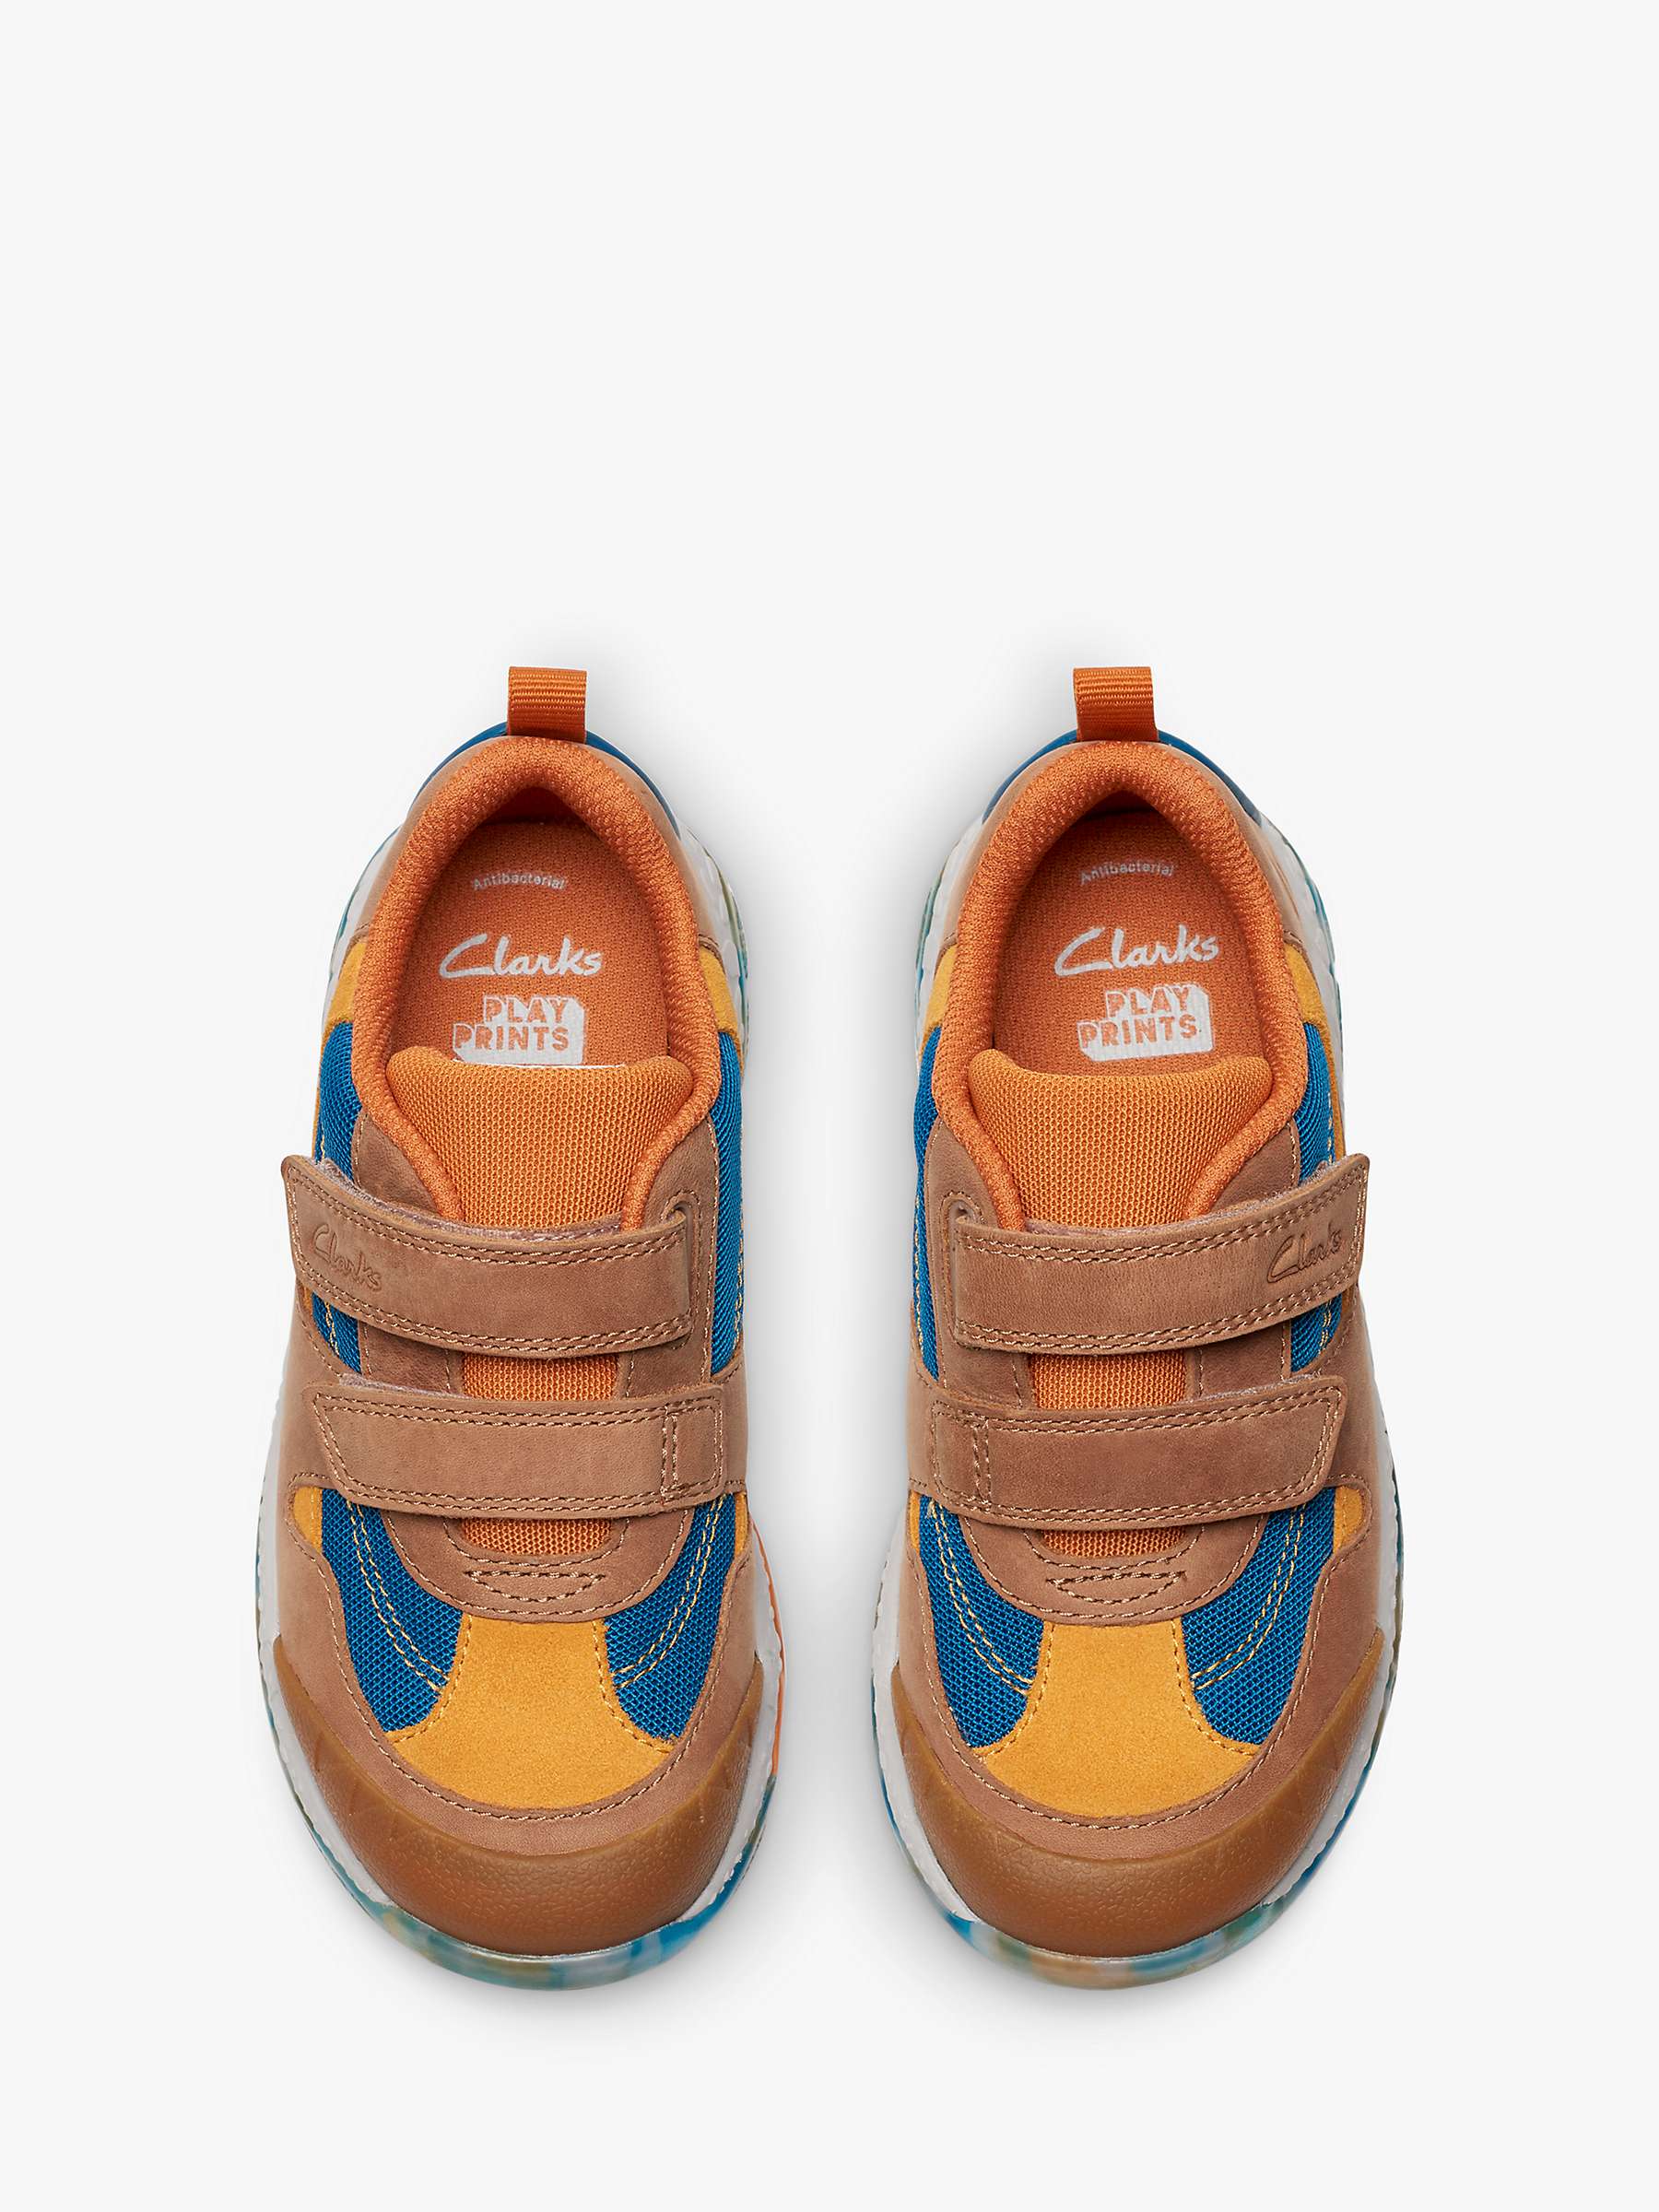 Buy Clarks Kids' 3D Steggy Tail Fun Trainers, Tan Online at johnlewis.com